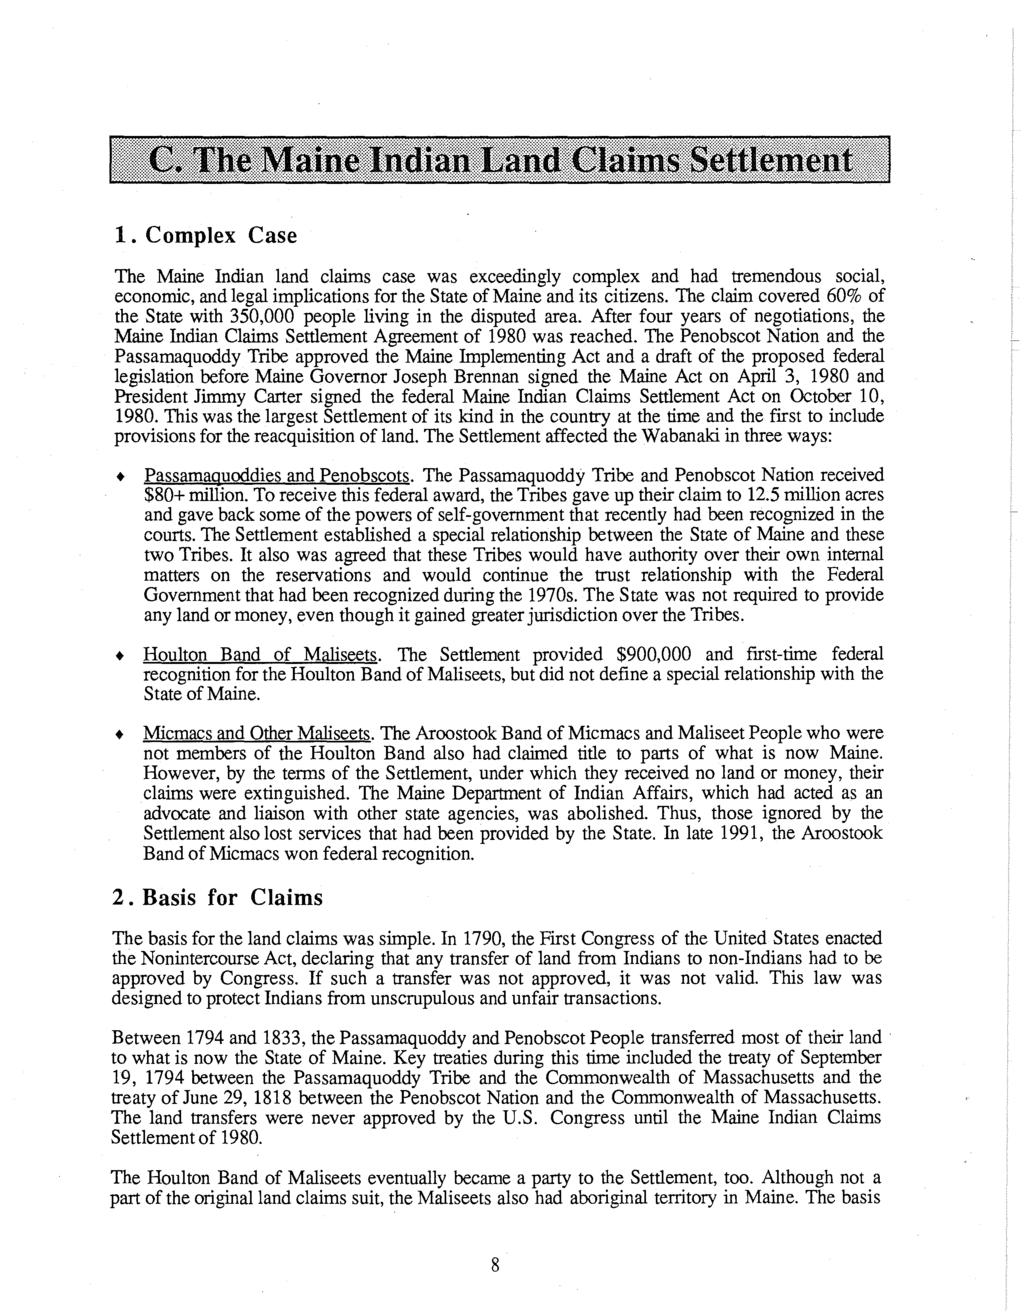 1. Complex Case The Maine Indian land claims case was exceedingly complex and had tremendous social, economic, and legal implications for the State of Maine and its citizens.